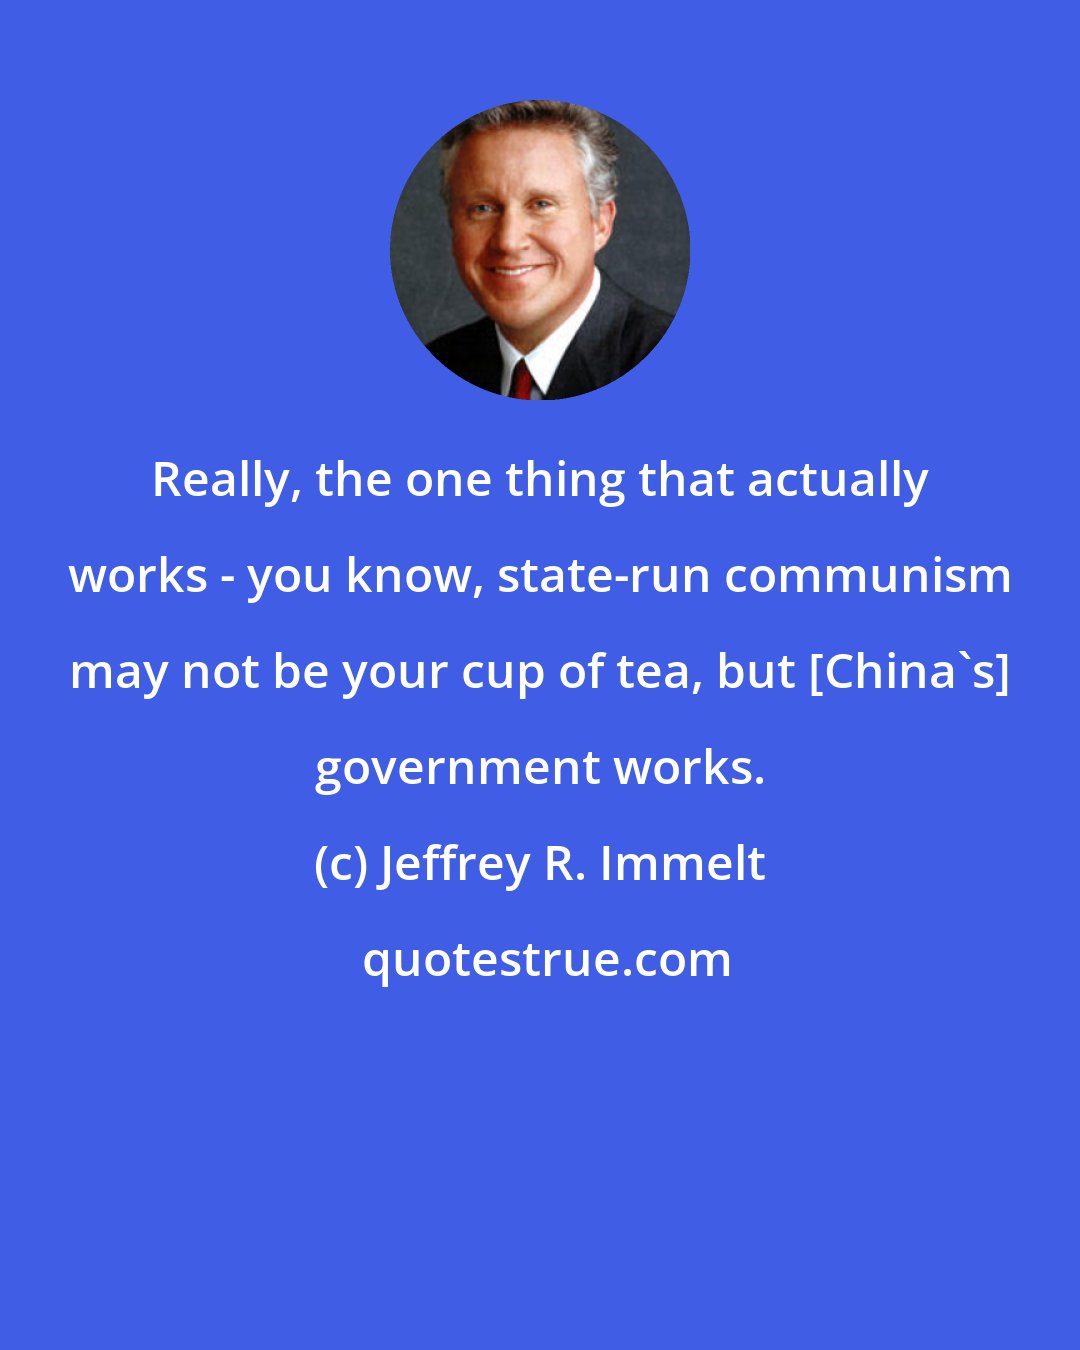 Jeffrey R. Immelt: Really, the one thing that actually works - you know, state-run communism may not be your cup of tea, but [China's] government works.